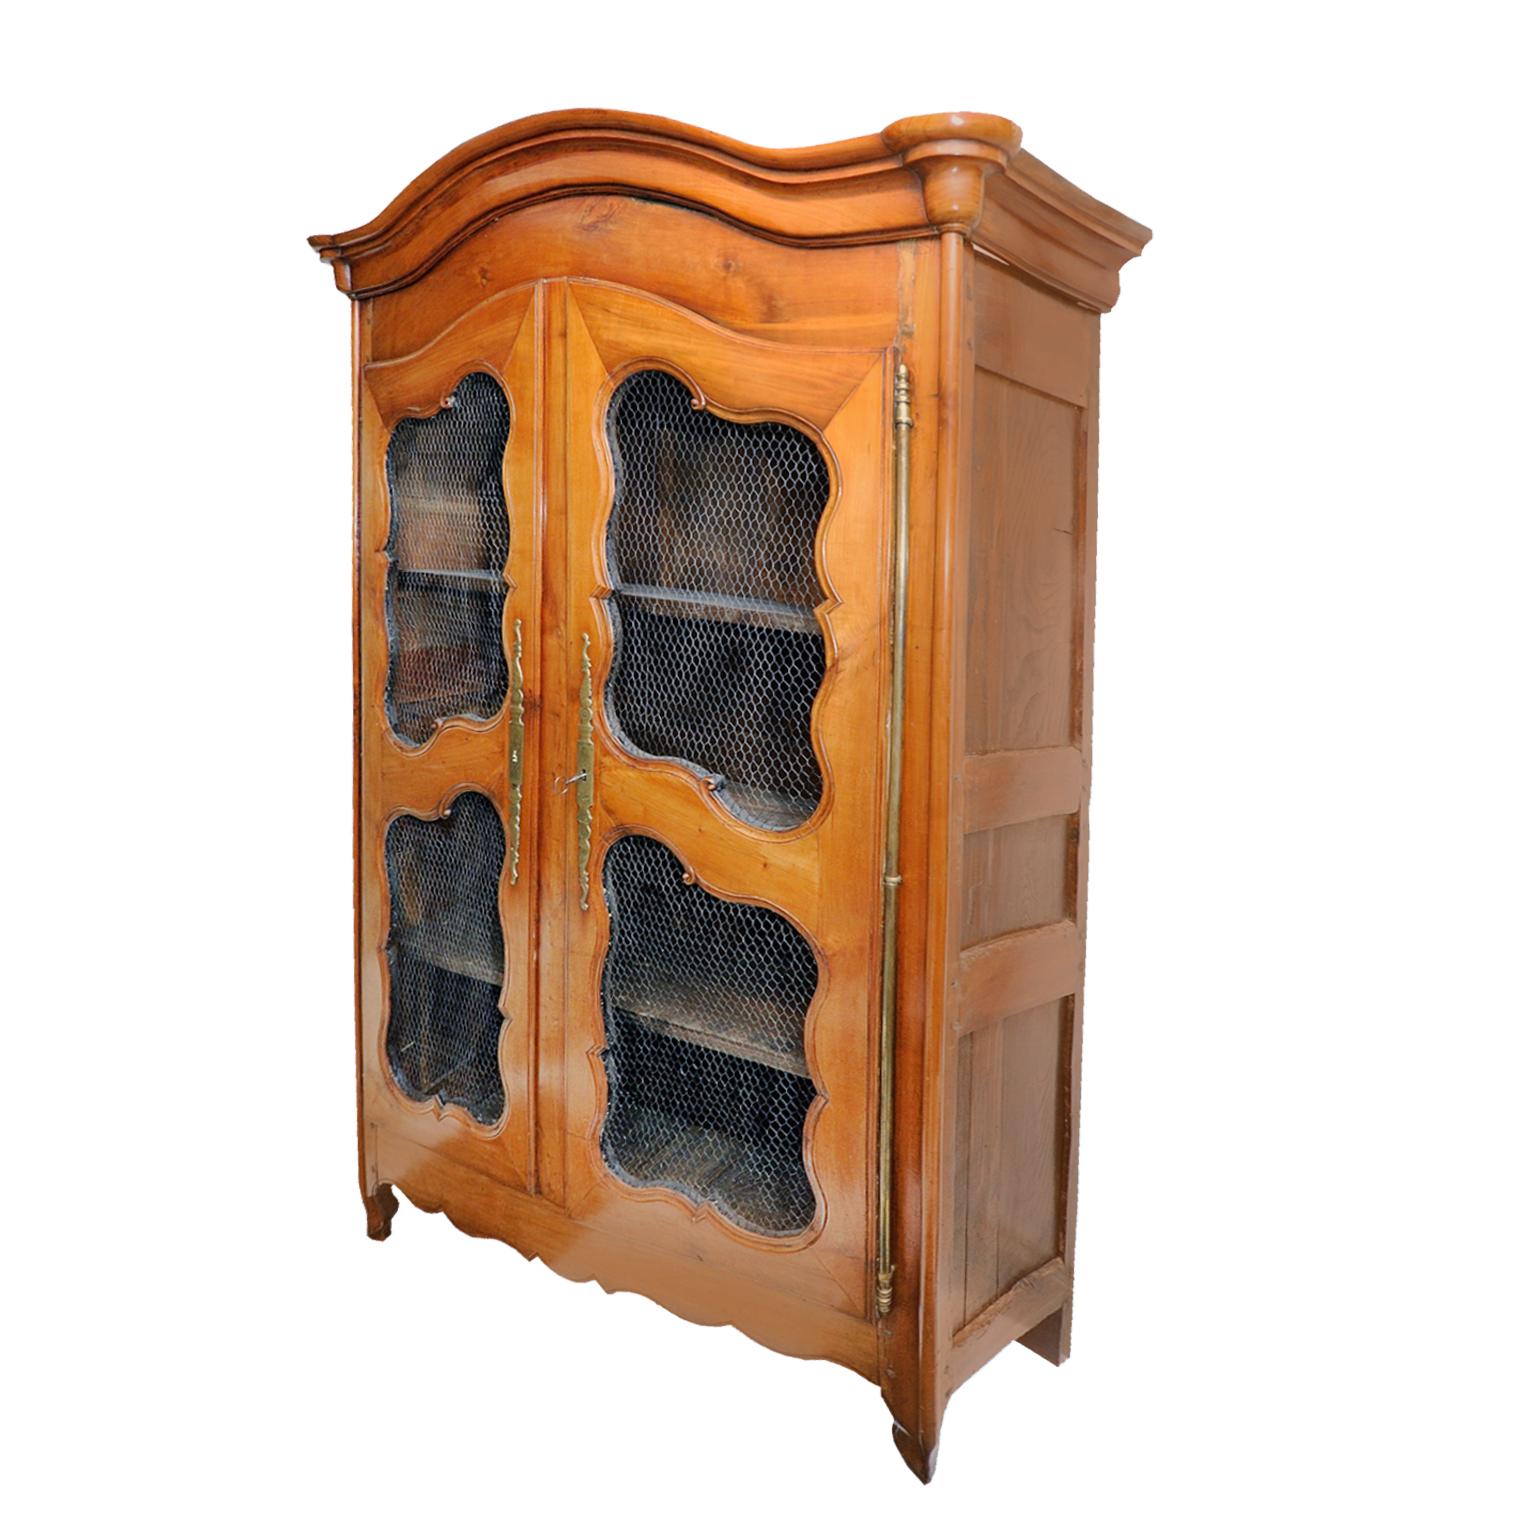 This is a superb 18th century, Louis XV French pale cherrywood cupboard or bookcase of wonderful color with wire grills and featuring superb original brass furniture, hinges, escutcheons, lock and key, circa 1760.
 